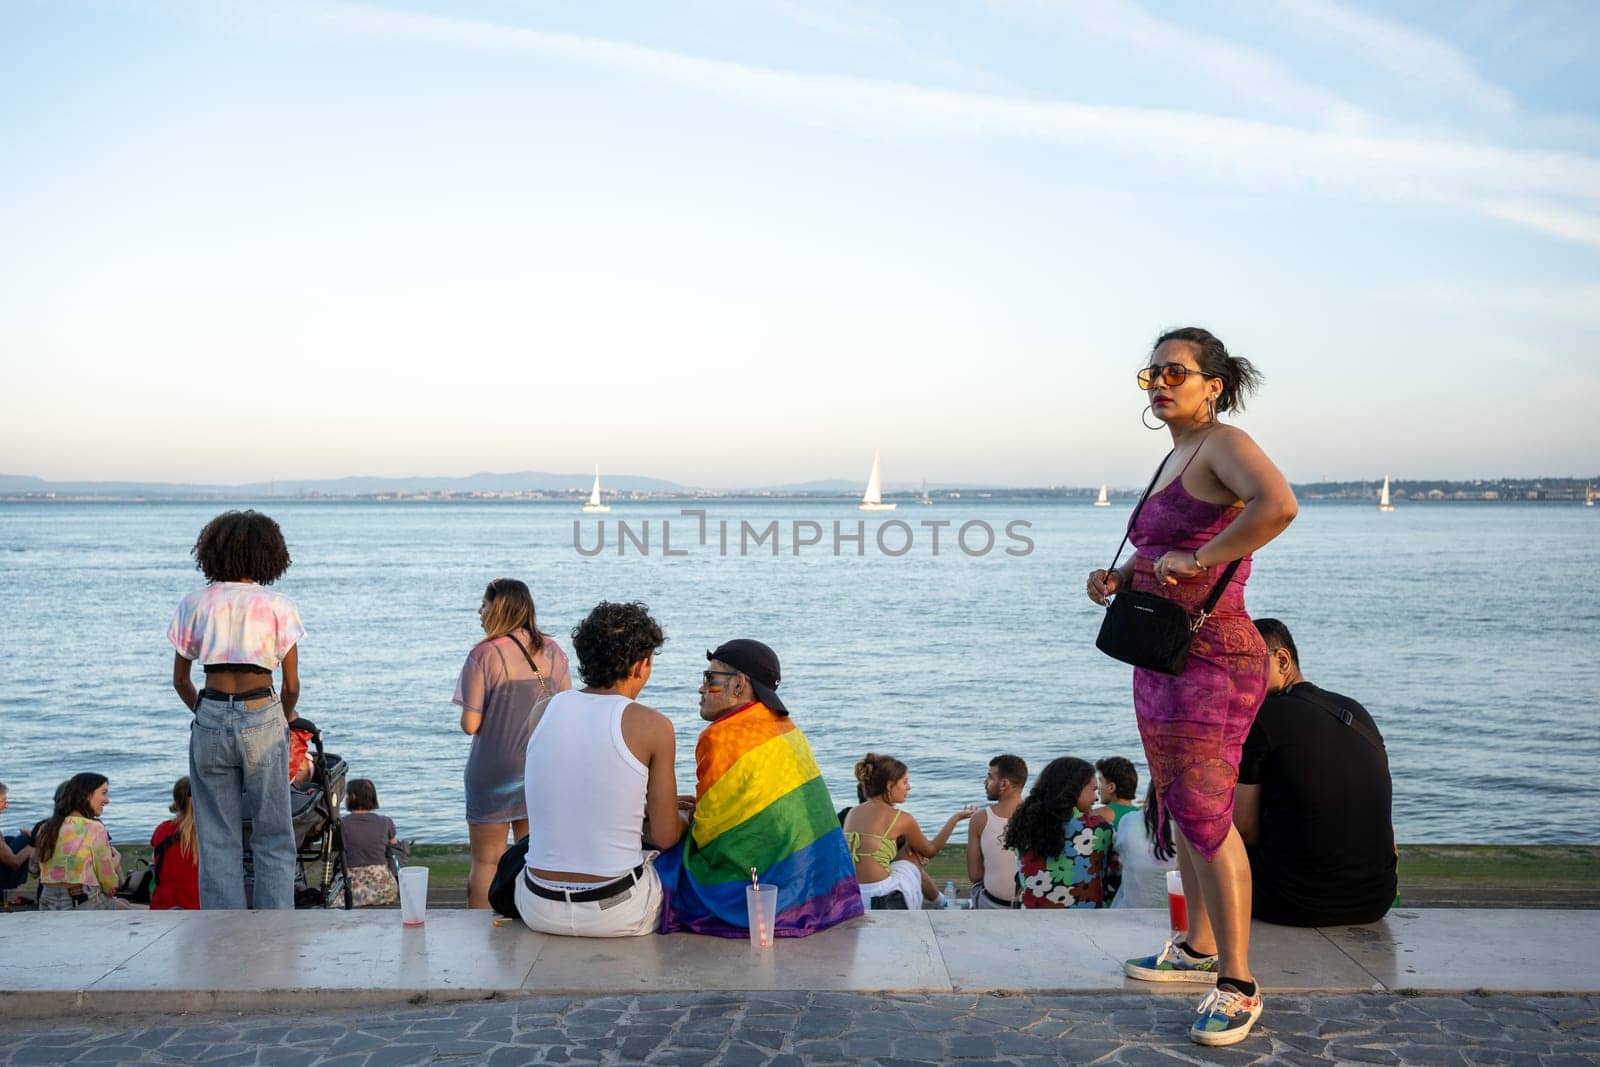 Lisbon, Portugal. 17 June 2023 Friends spending time together at Pride Parade. People communicating sitting on promenade with ocean and sailboats background. Rainbow flag for support LGBT individuals